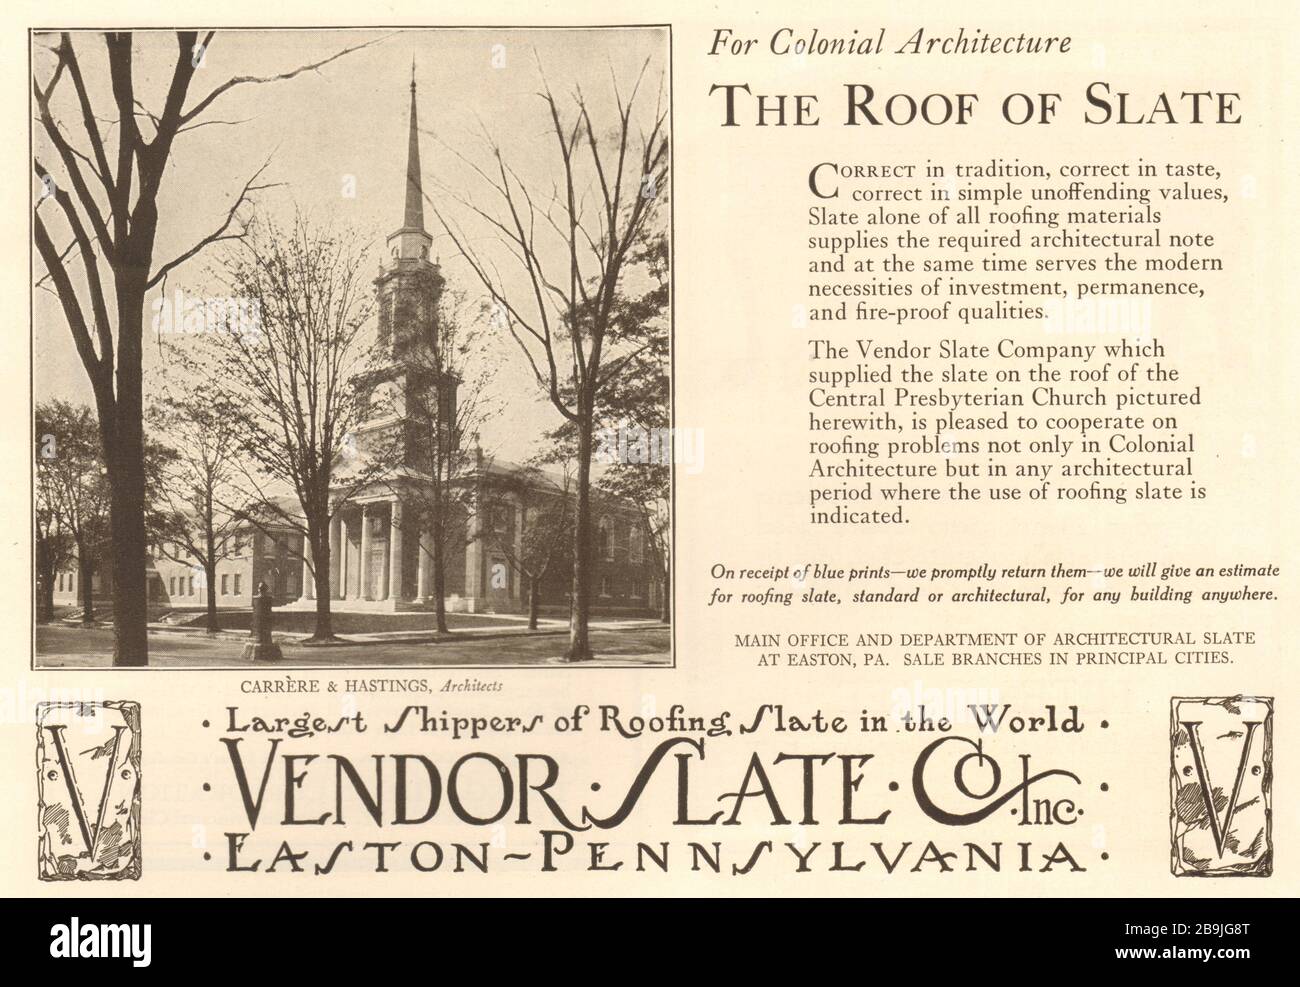 World's largest roofing slate shippers. Central Presbyterian church, Carrere & Hastings, Architects. Vendor Slate Co., Easton, Pennsylvania  (1922) Stock Photo